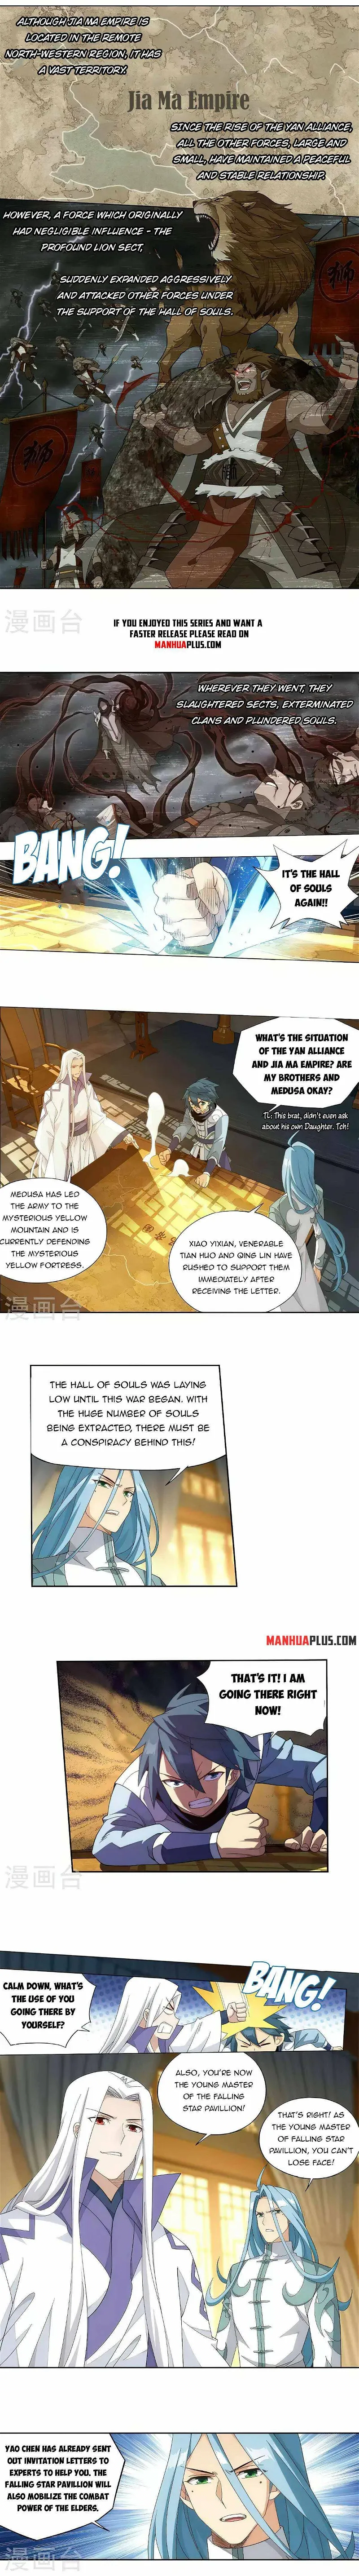 Doupo Cangqiong Chapter 357 page 2